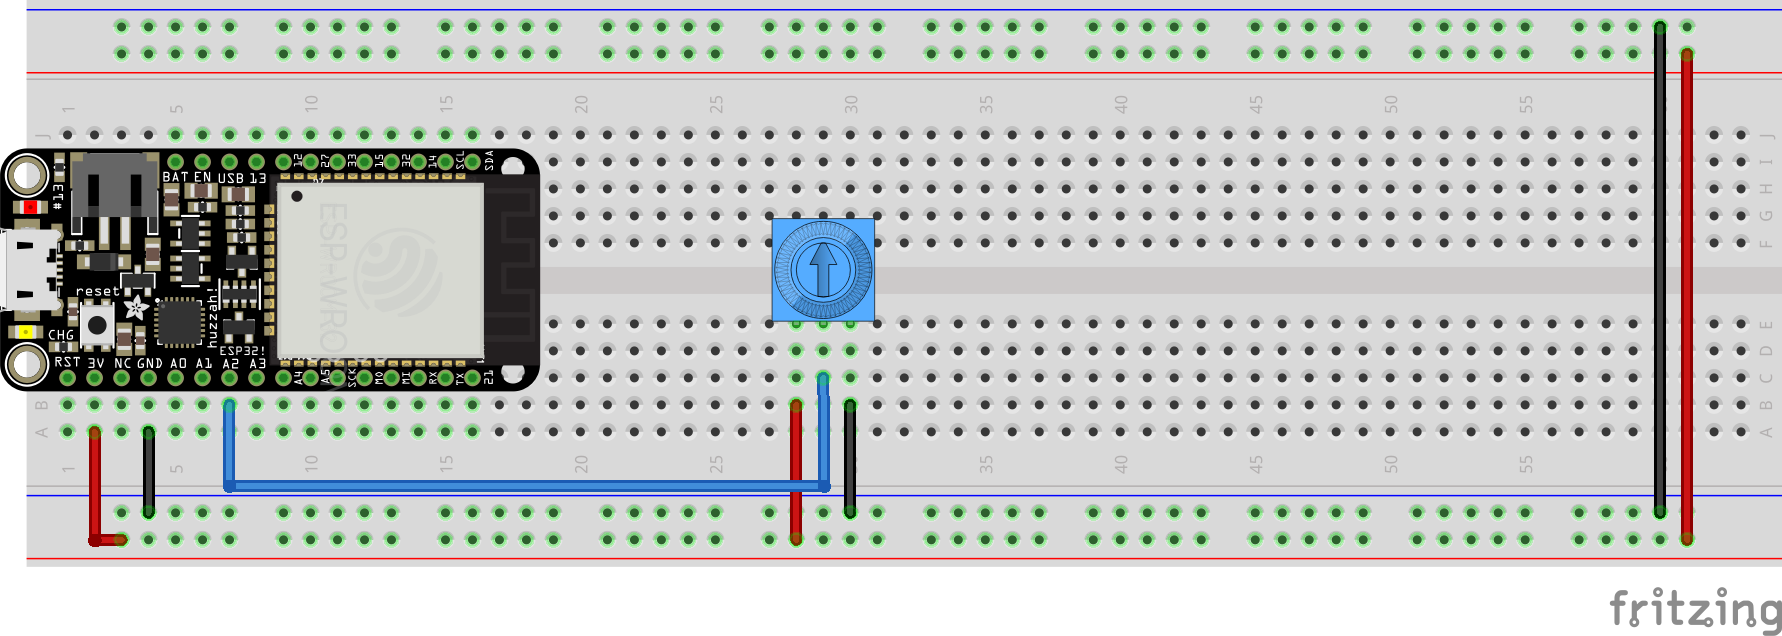 Adafruit ESP32 plugged into a breadboard with a potentiometer connected to input A2